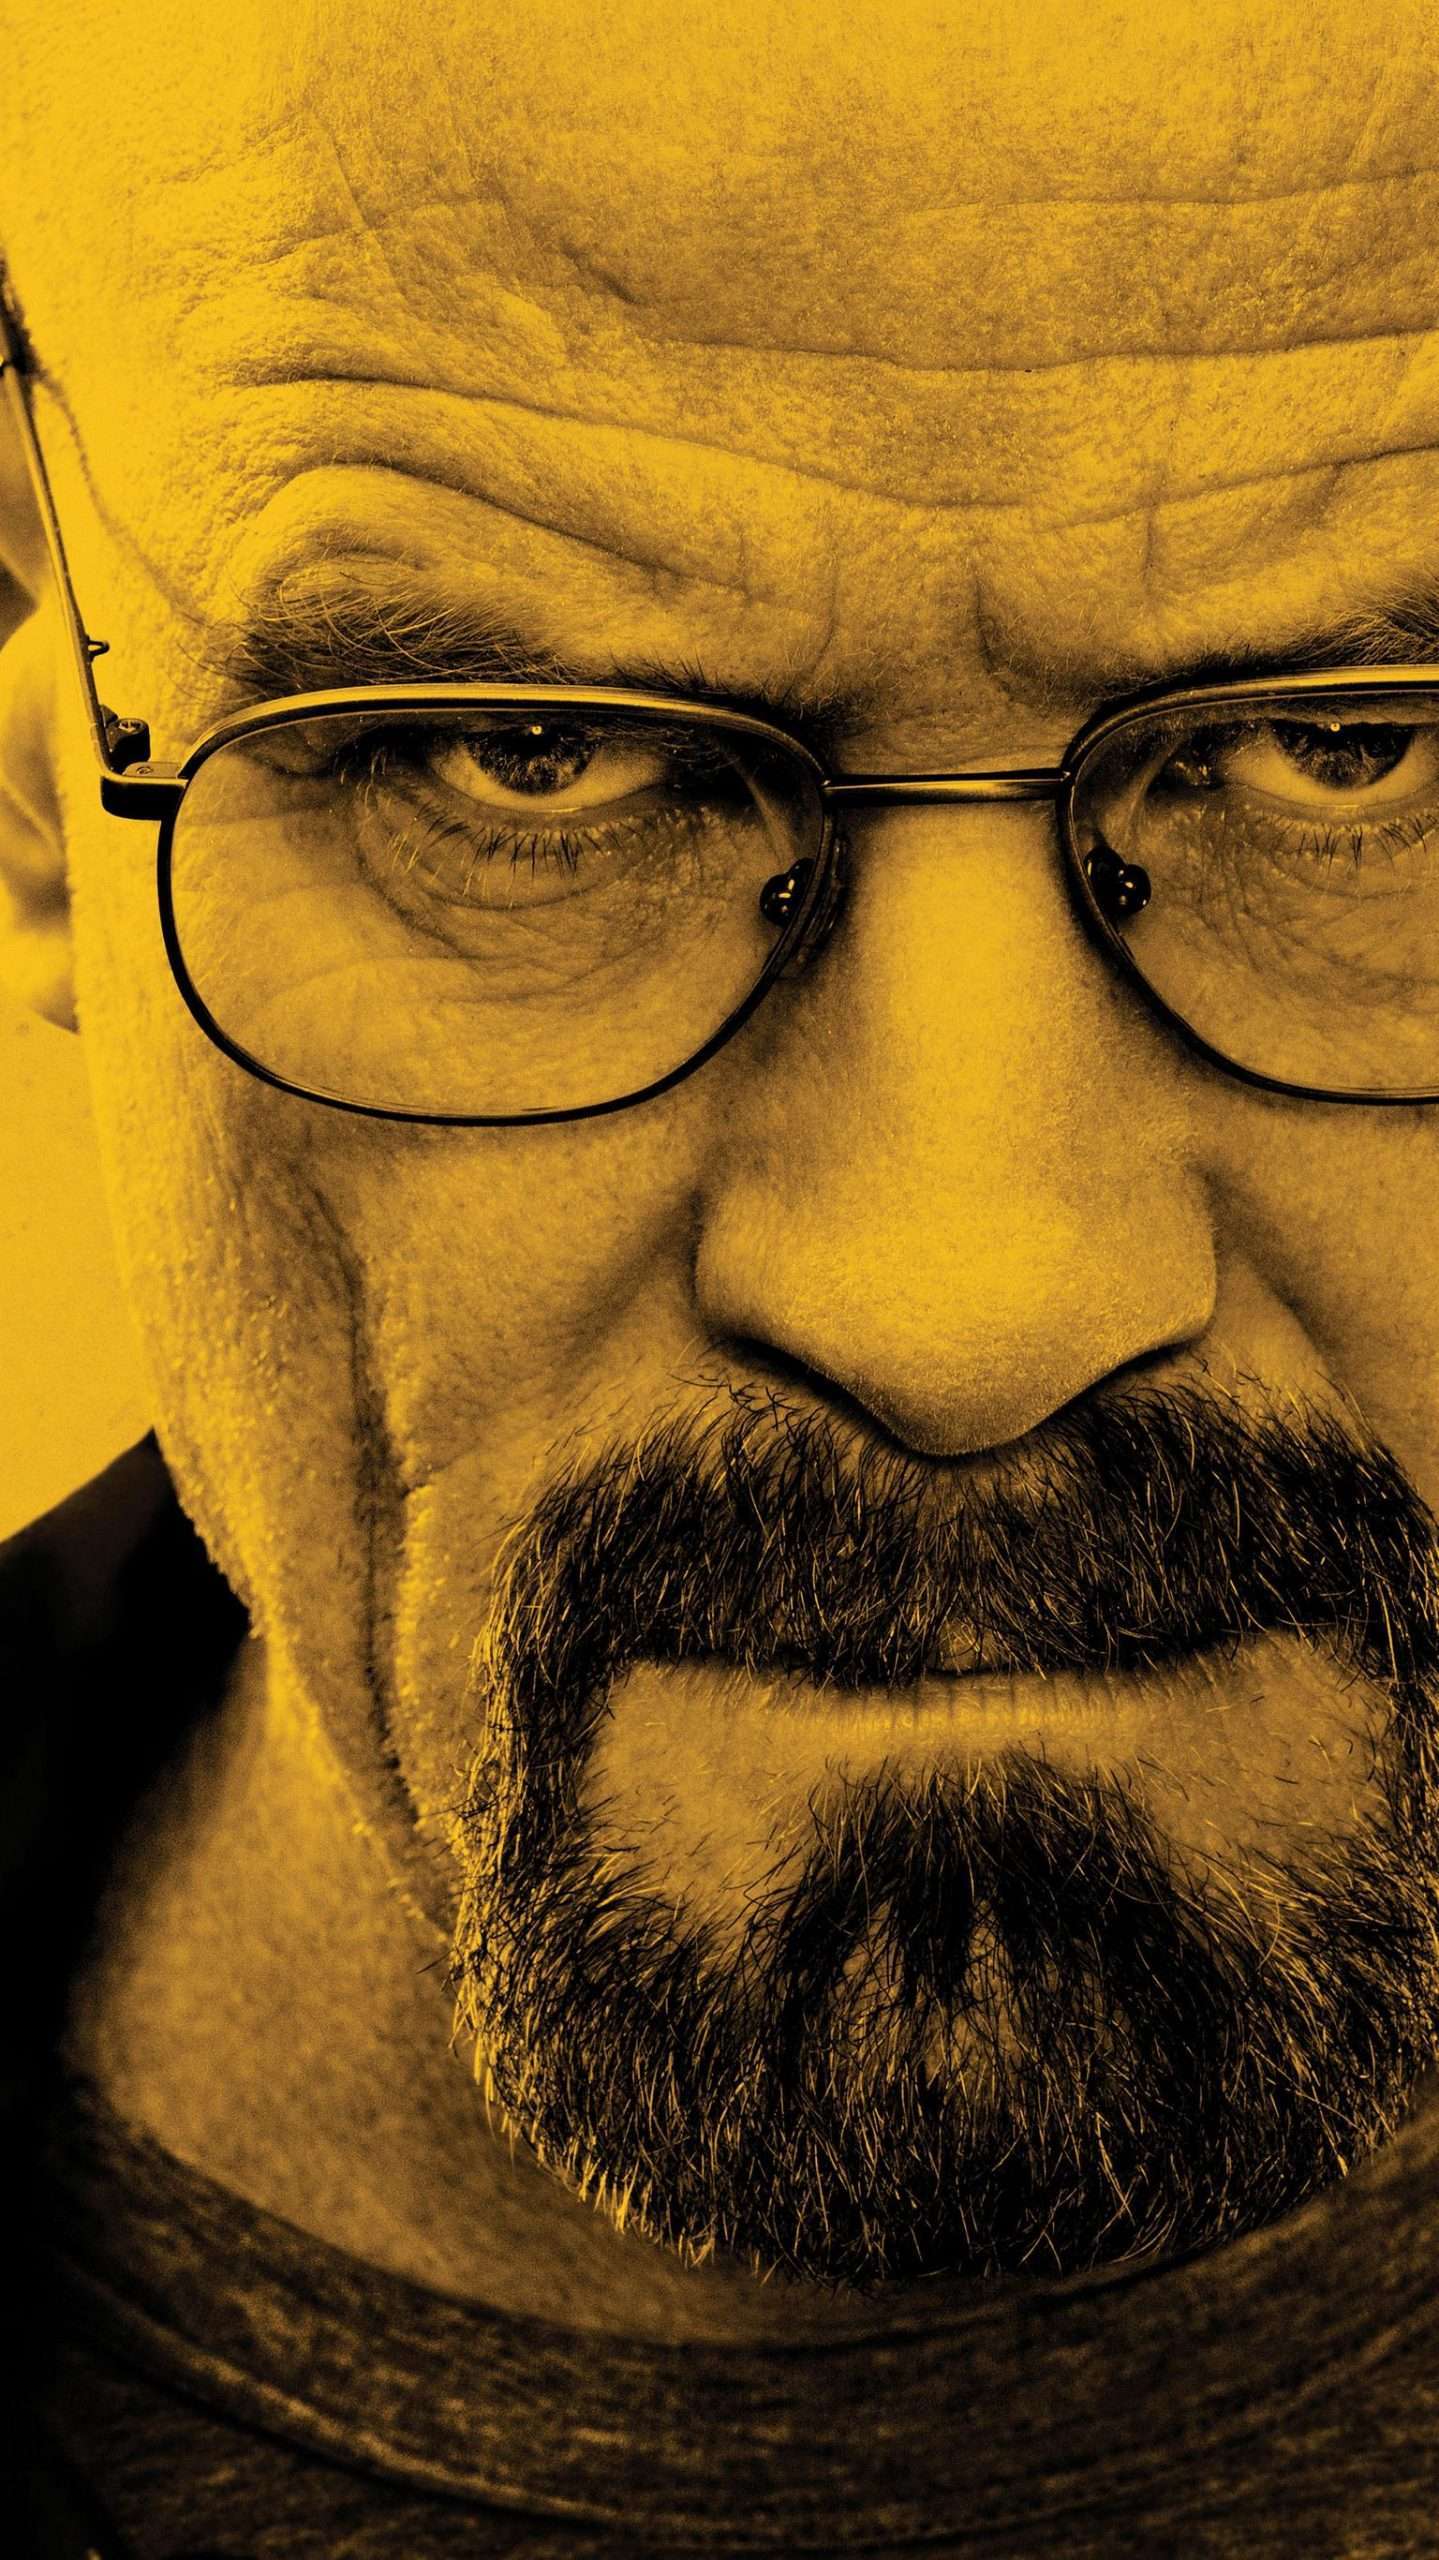 1080x1920 breaking bad, tv shows, hd for Iphone 6, 7, 8 wallpaper -  Coolwallpapers.me!